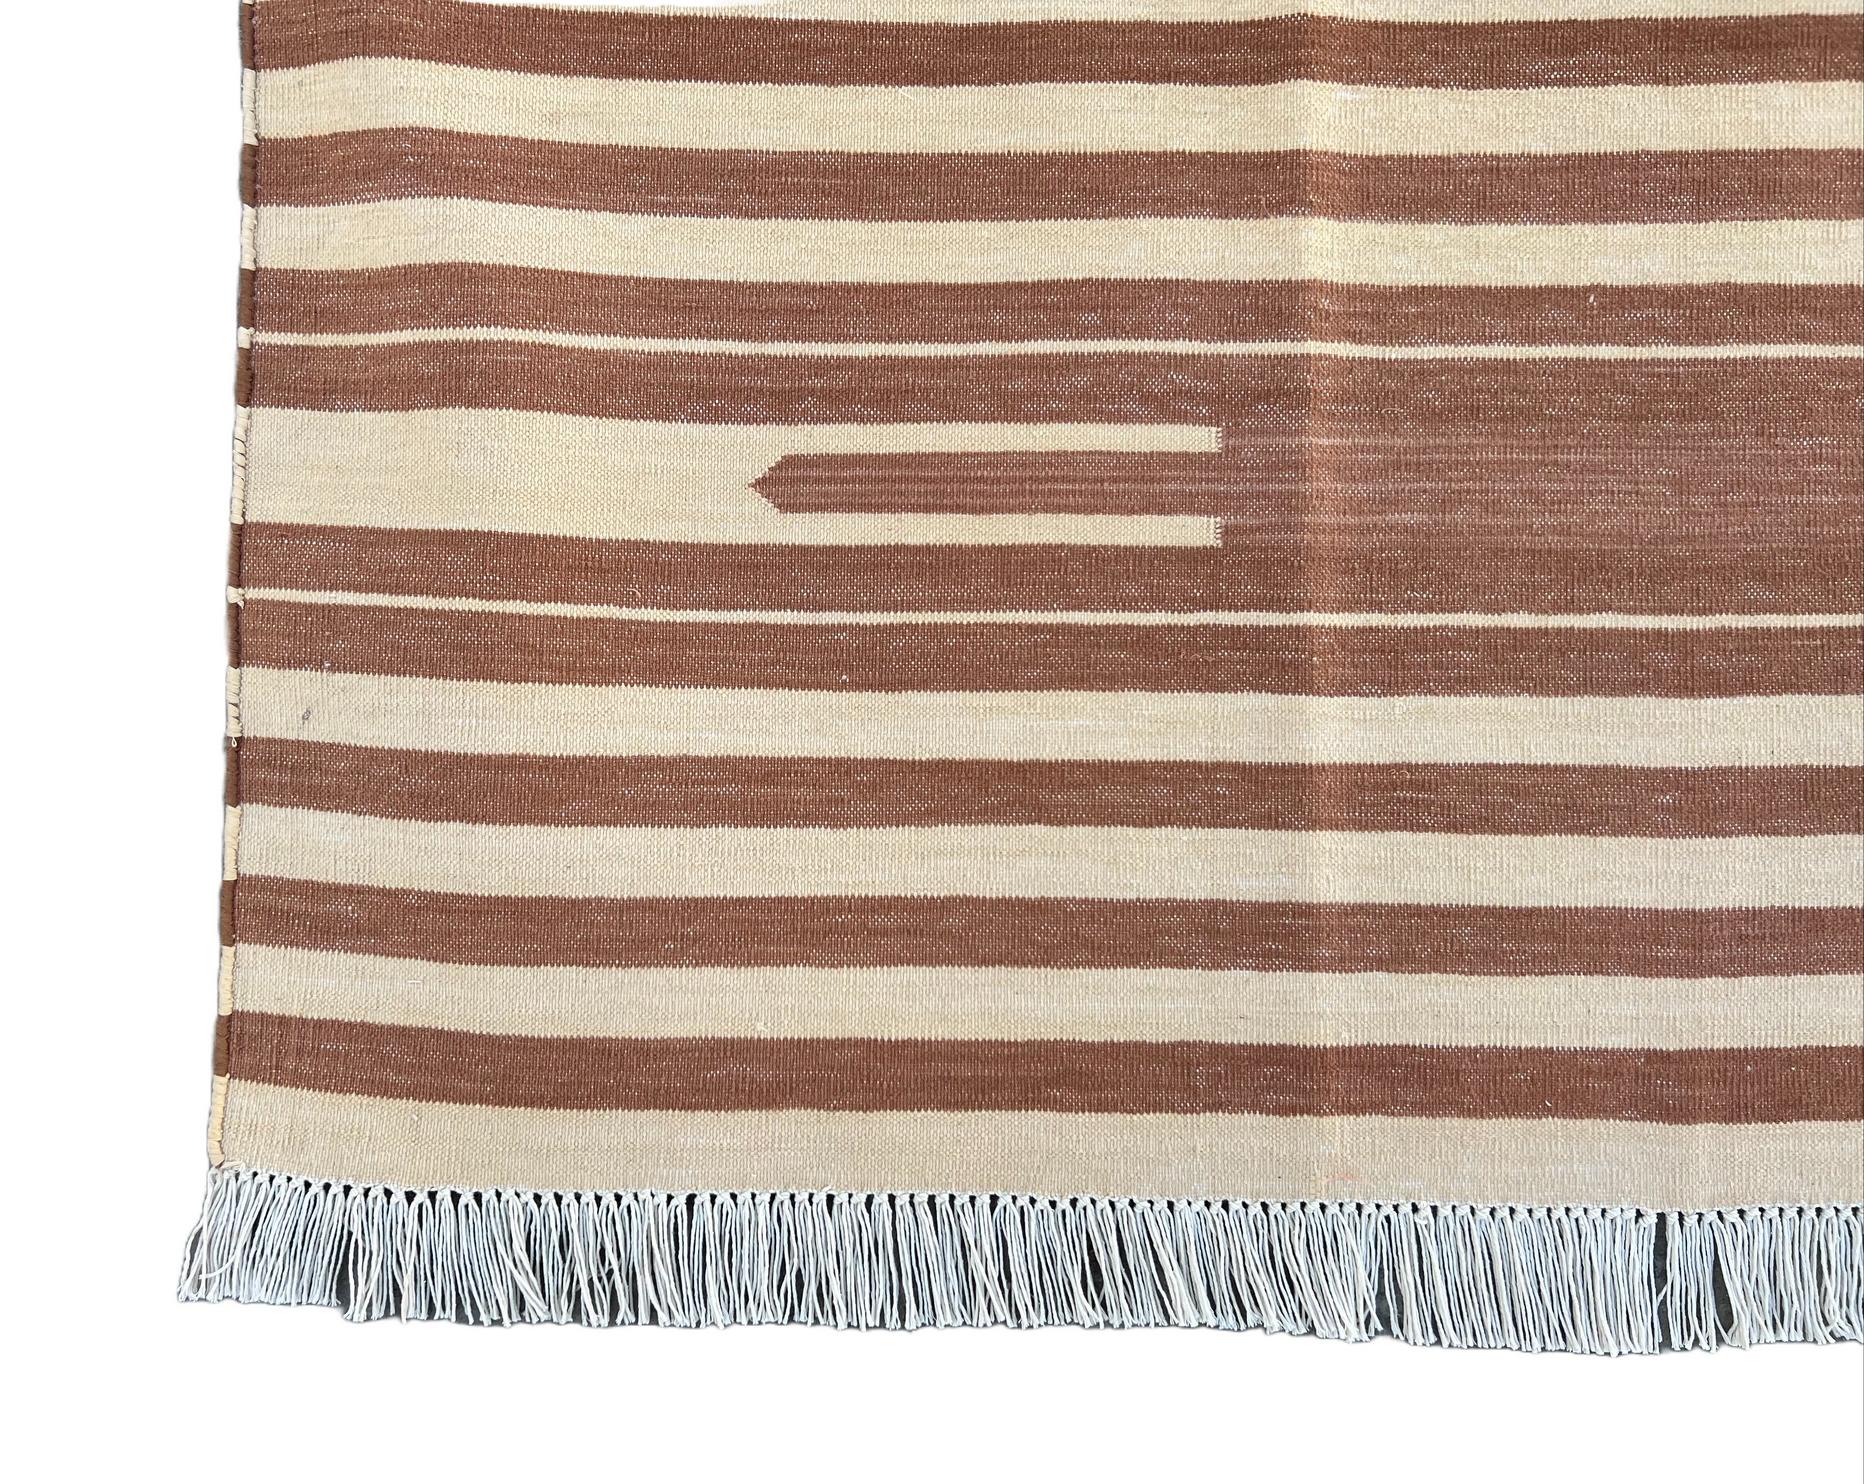 Handmade Cotton Area Flat Weave Rug, 5x7 Tan And Cream Striped Indian Dhurrie For Sale 2